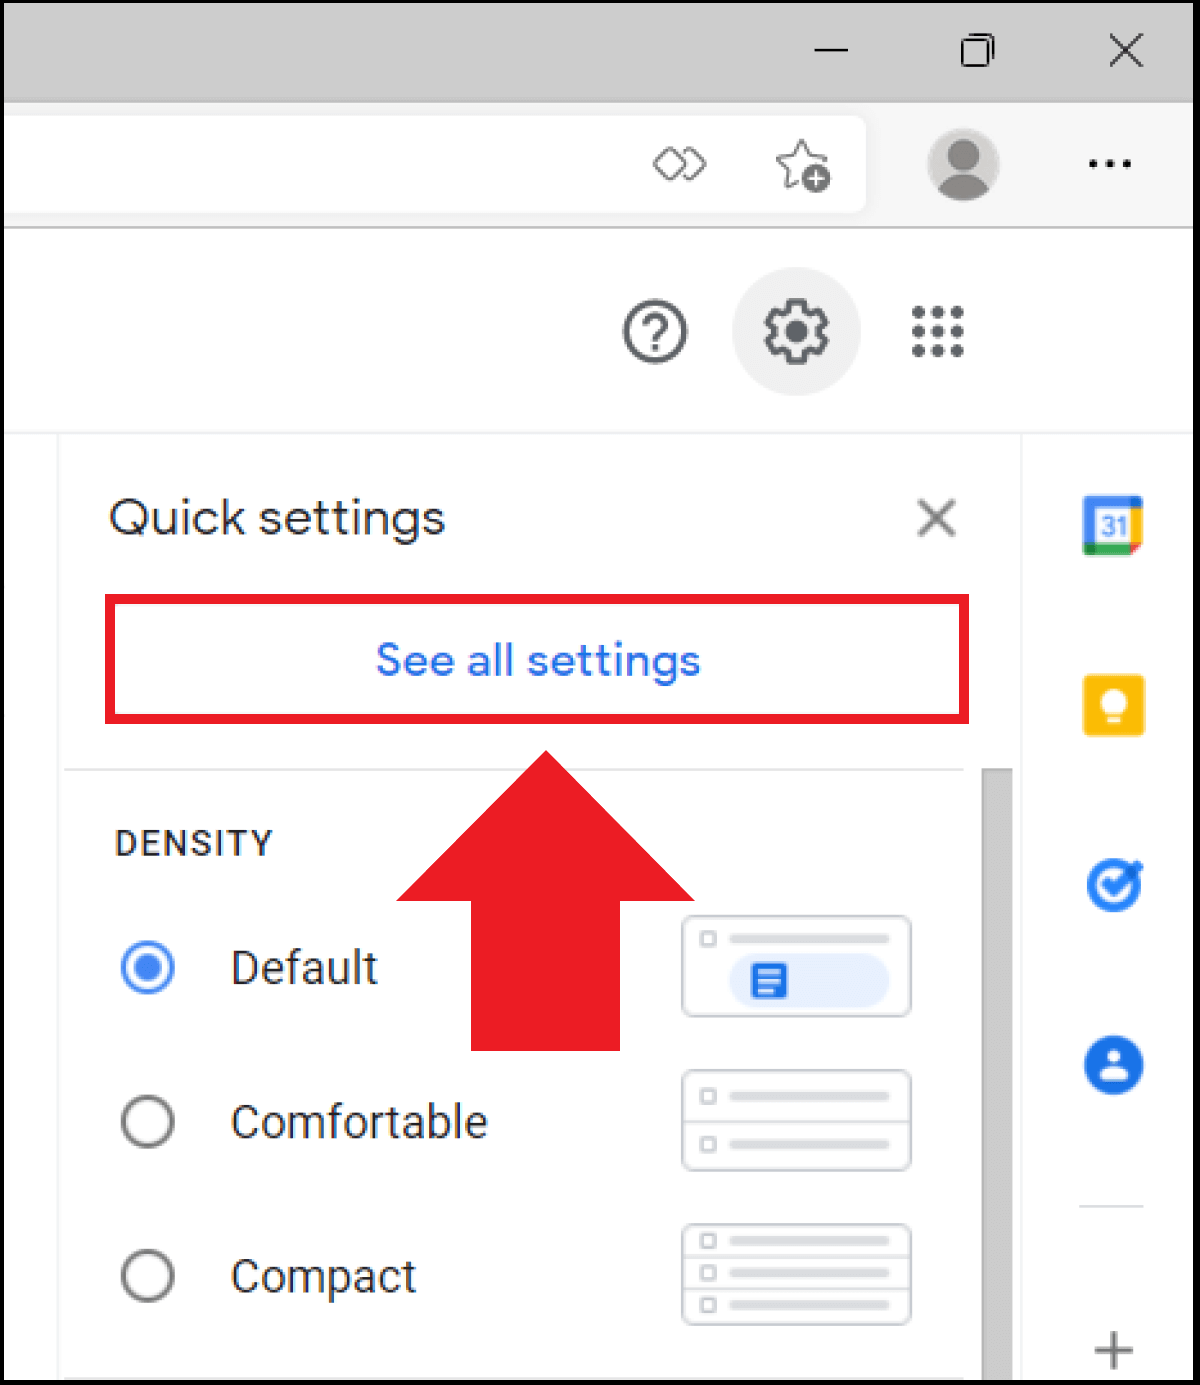 The “See all settings” option in Gmail